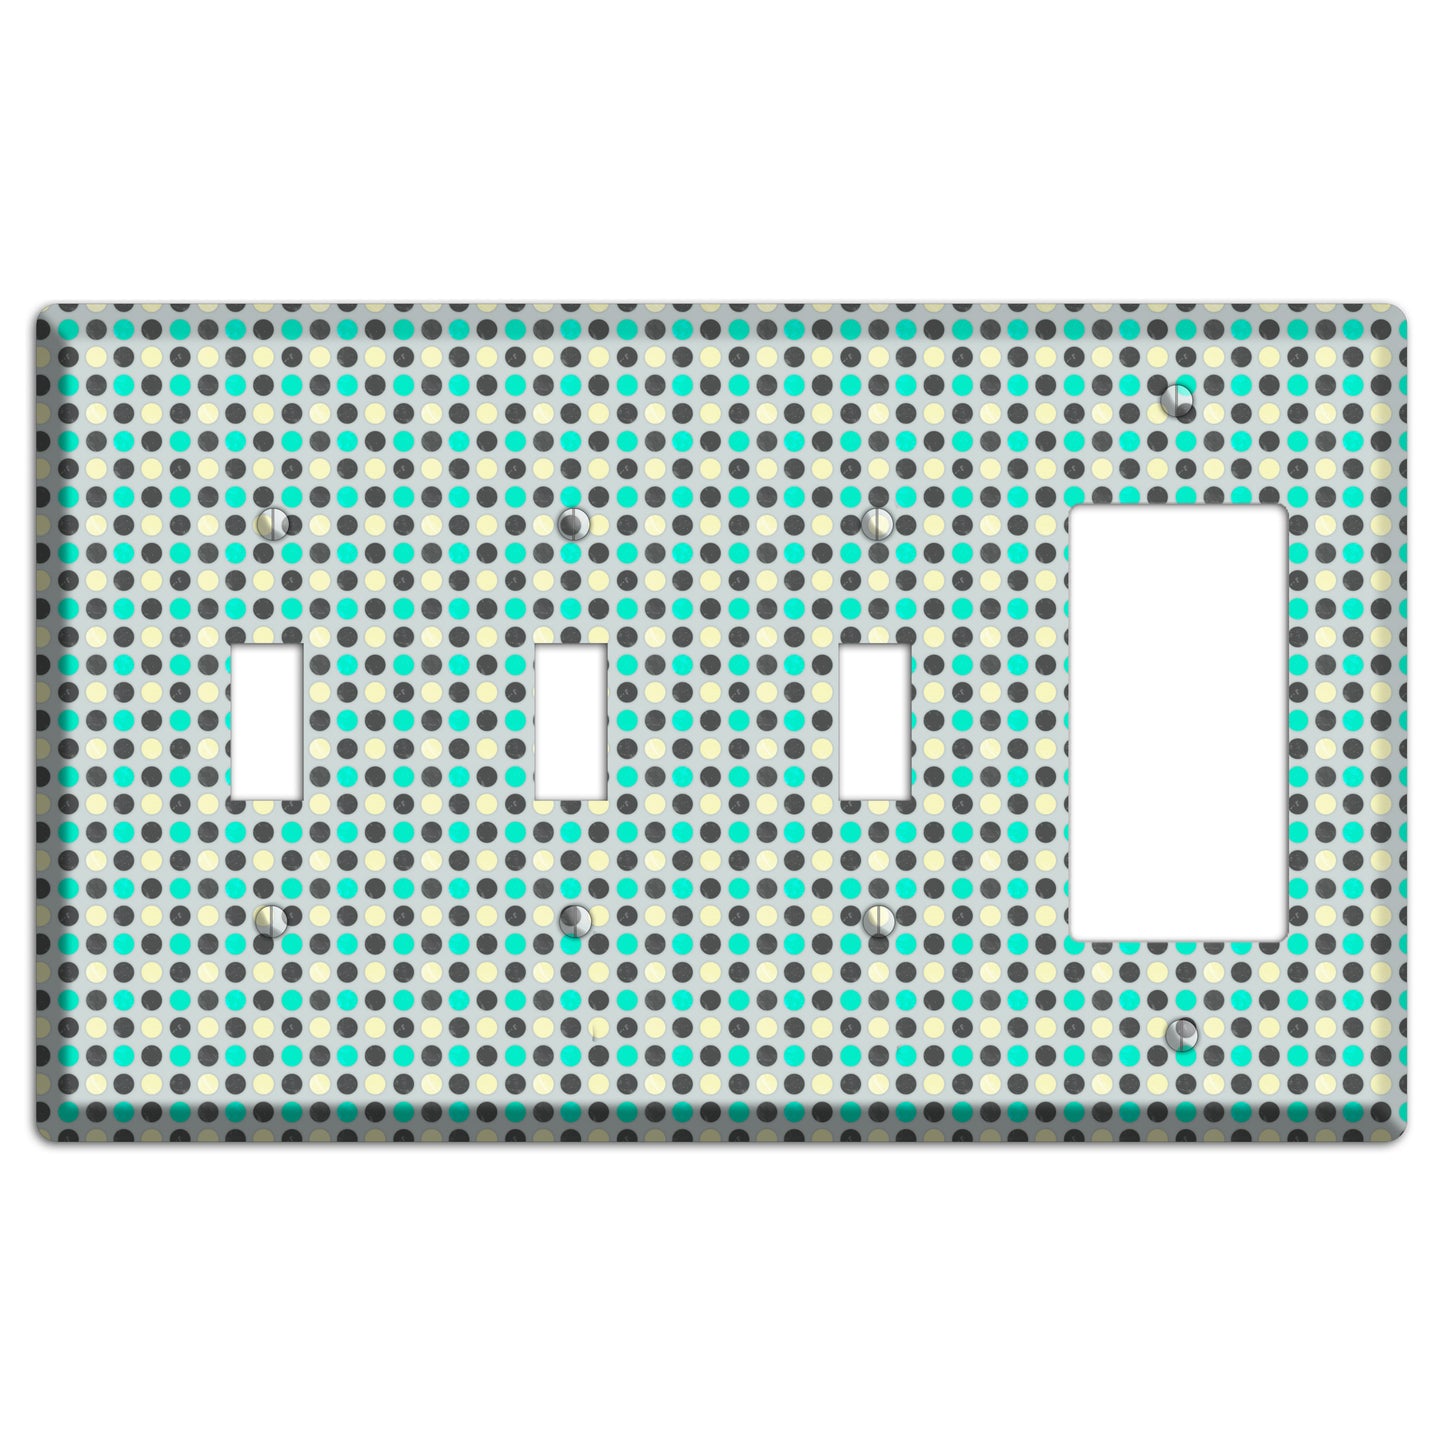 Grey with Black Off White and Turquoise Dots 3 Toggle / Rocker Wallplate